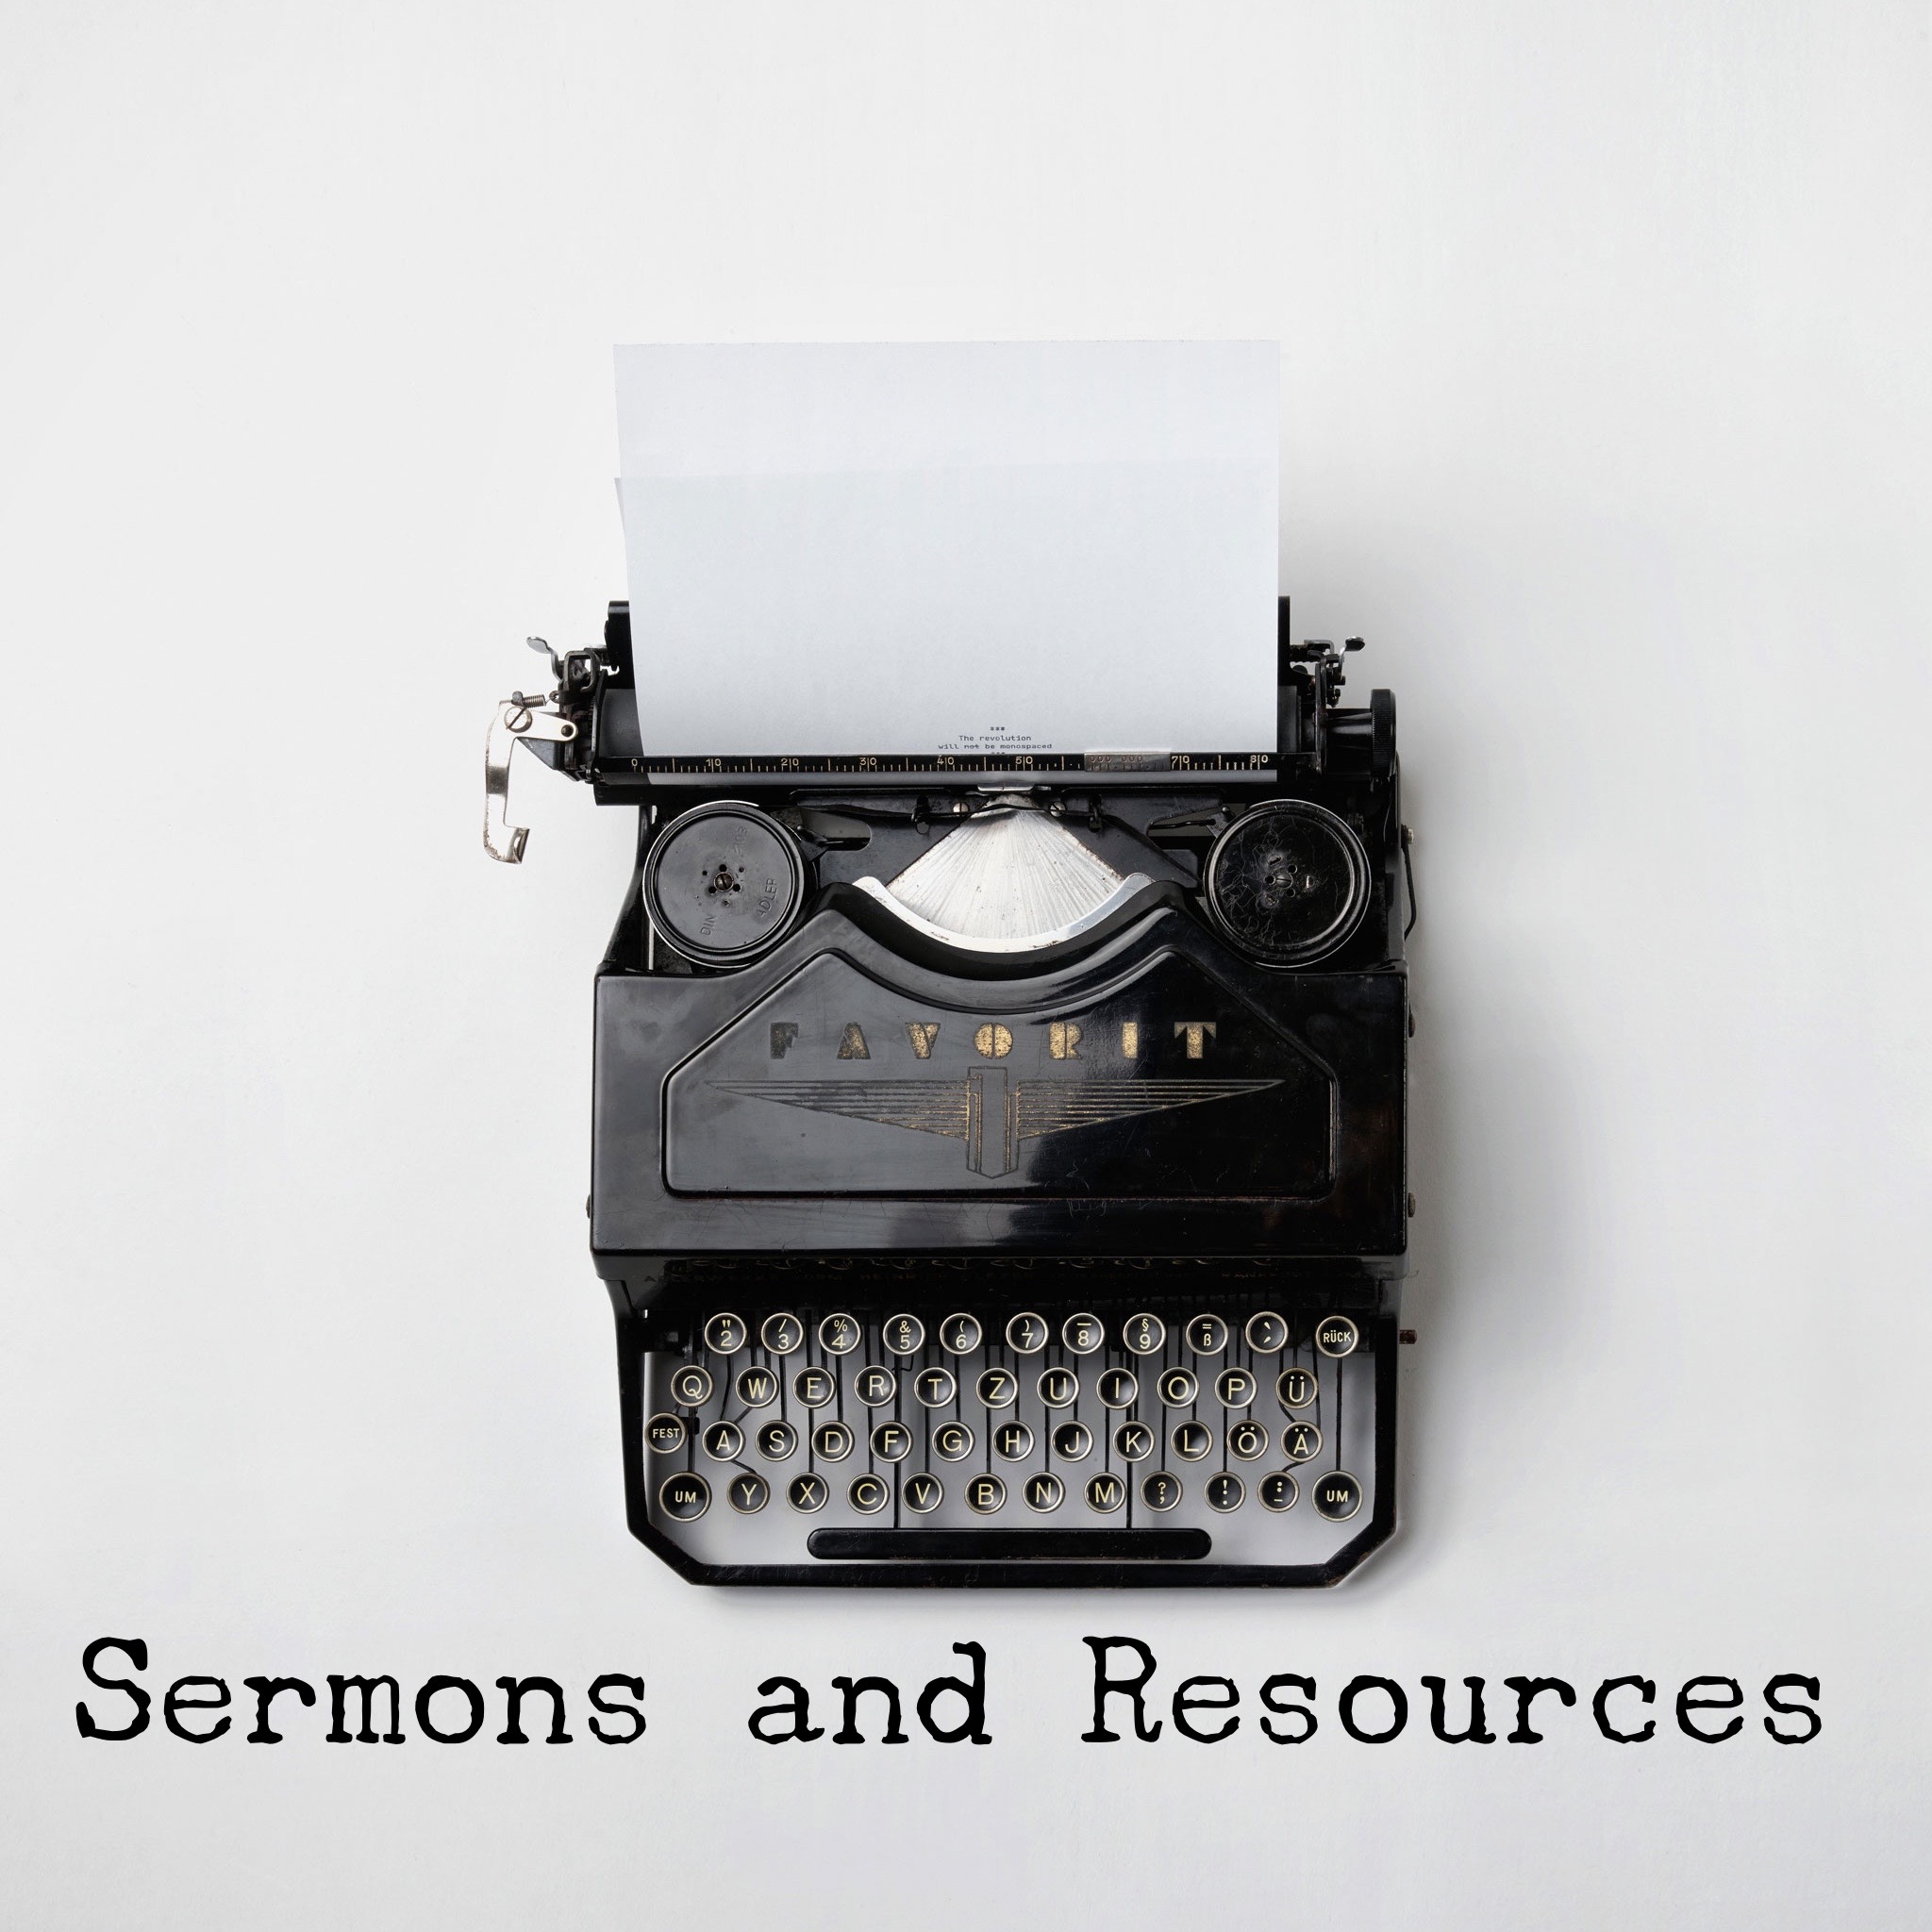 Sermons and Resources